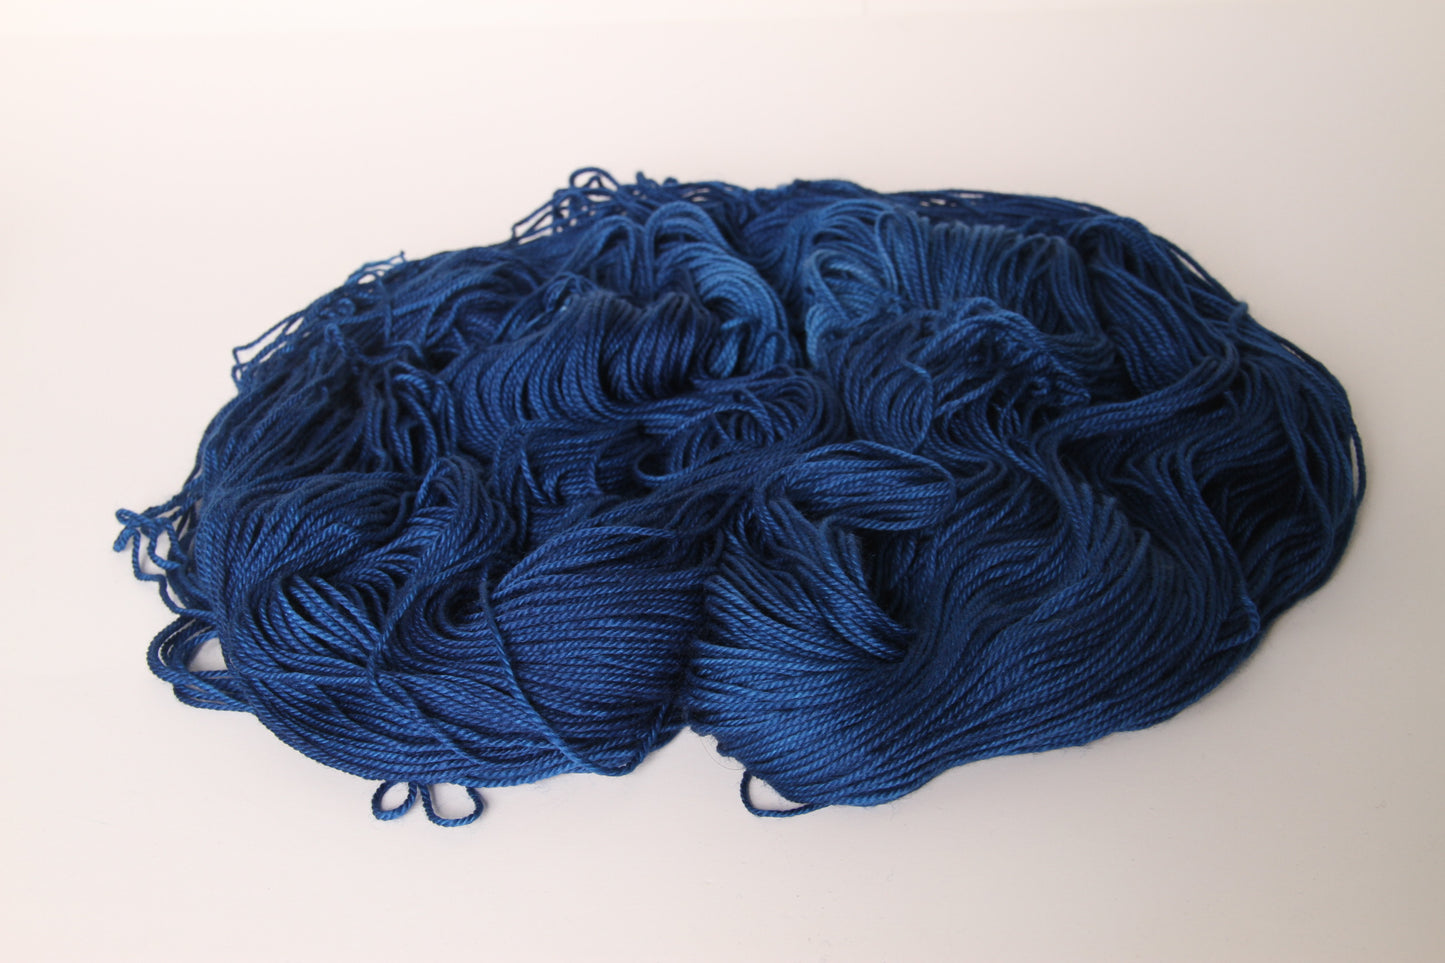 Cobalt | Merino/Cashmere Blend | Semi Solid | Ready to ship